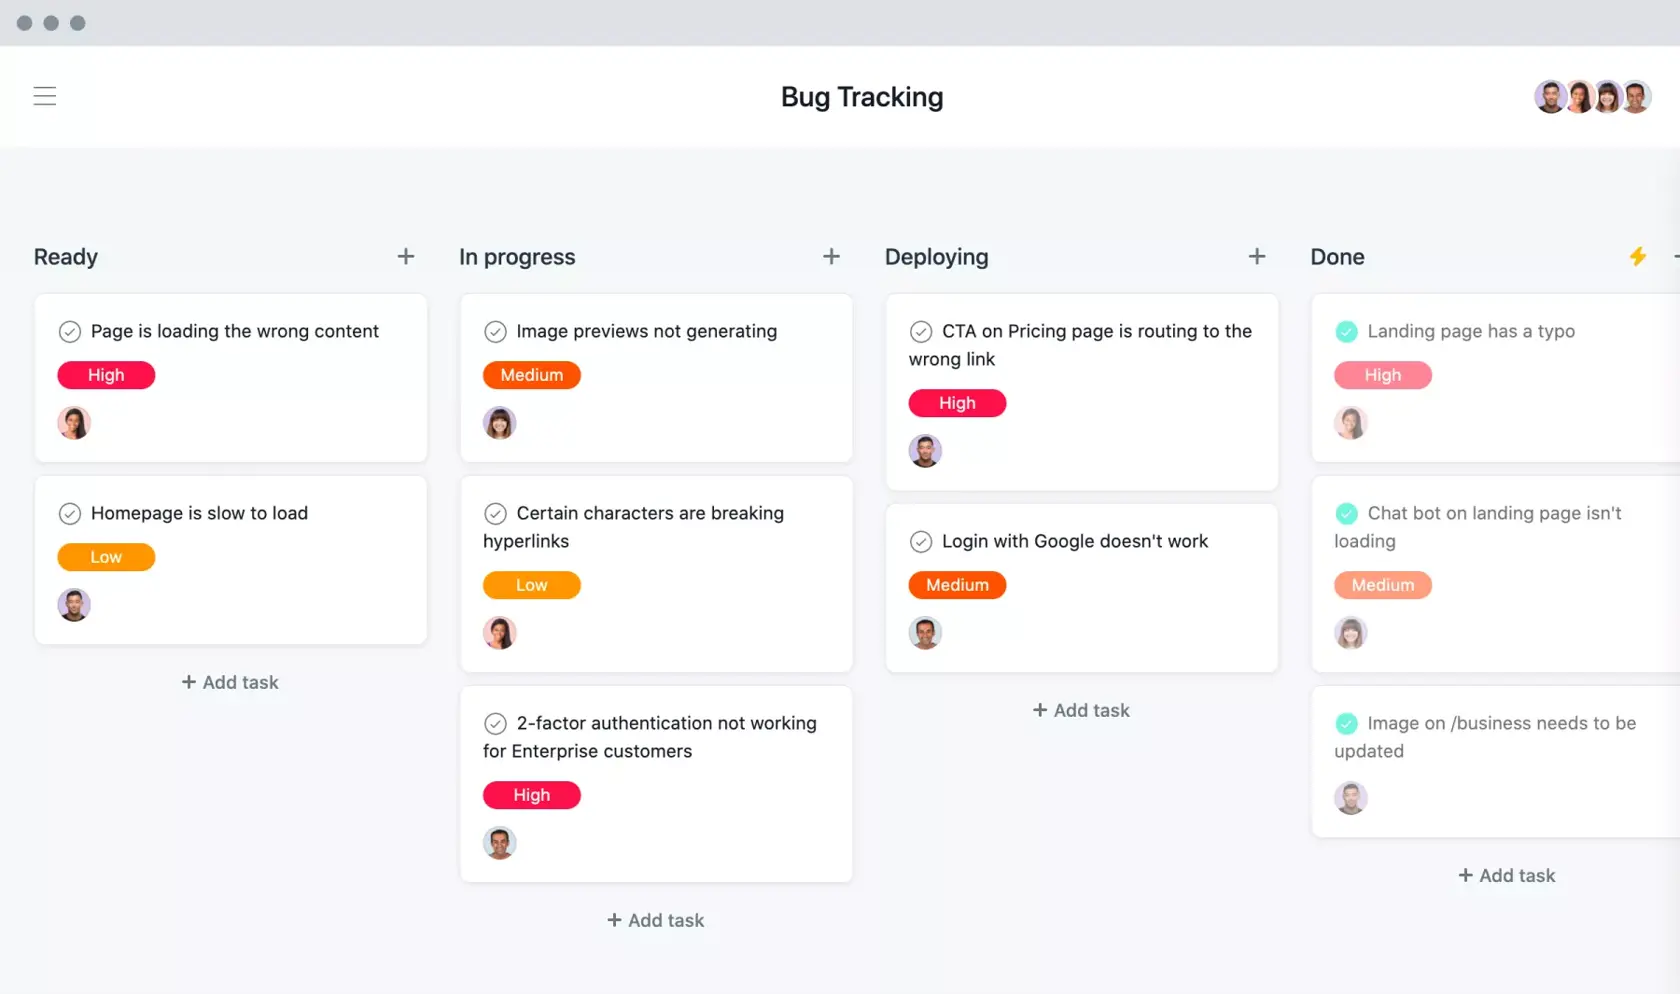 [Old Product UI] Bug tracking Kanban board example (Boards)